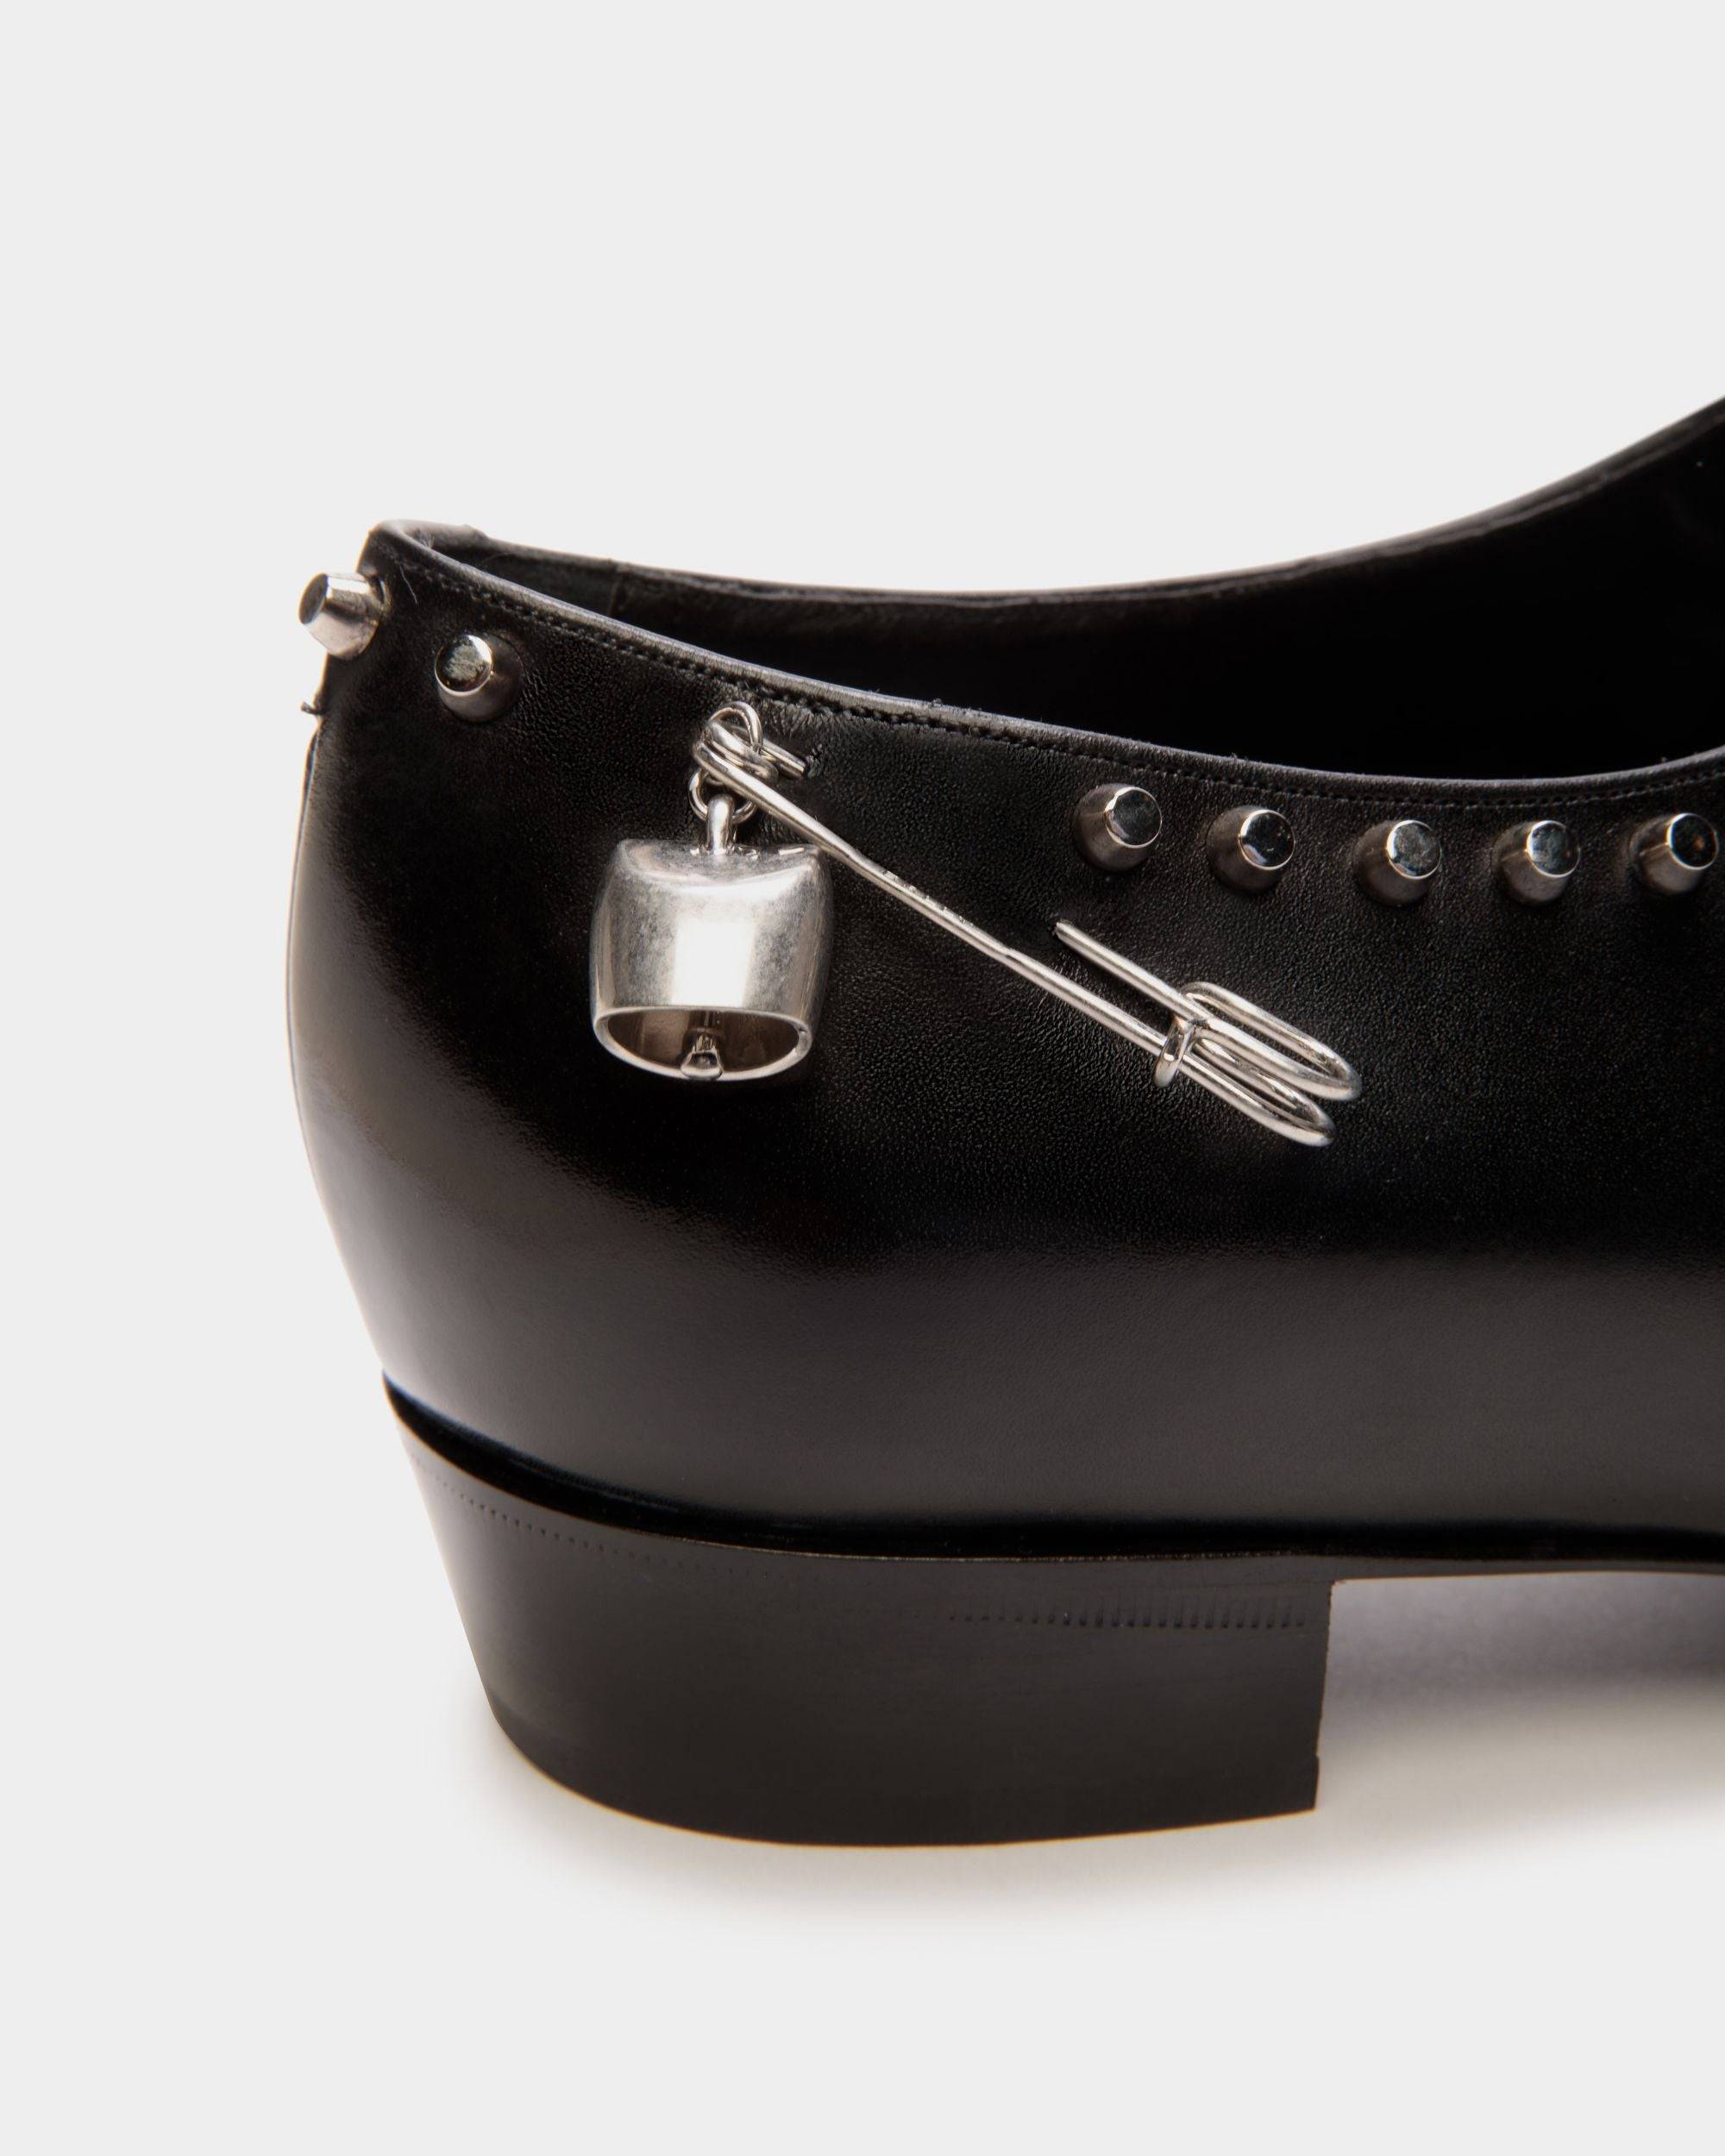 Glendale | Women's Mary-Jane in Black Leather with Studs | Bally | Still Life Detail